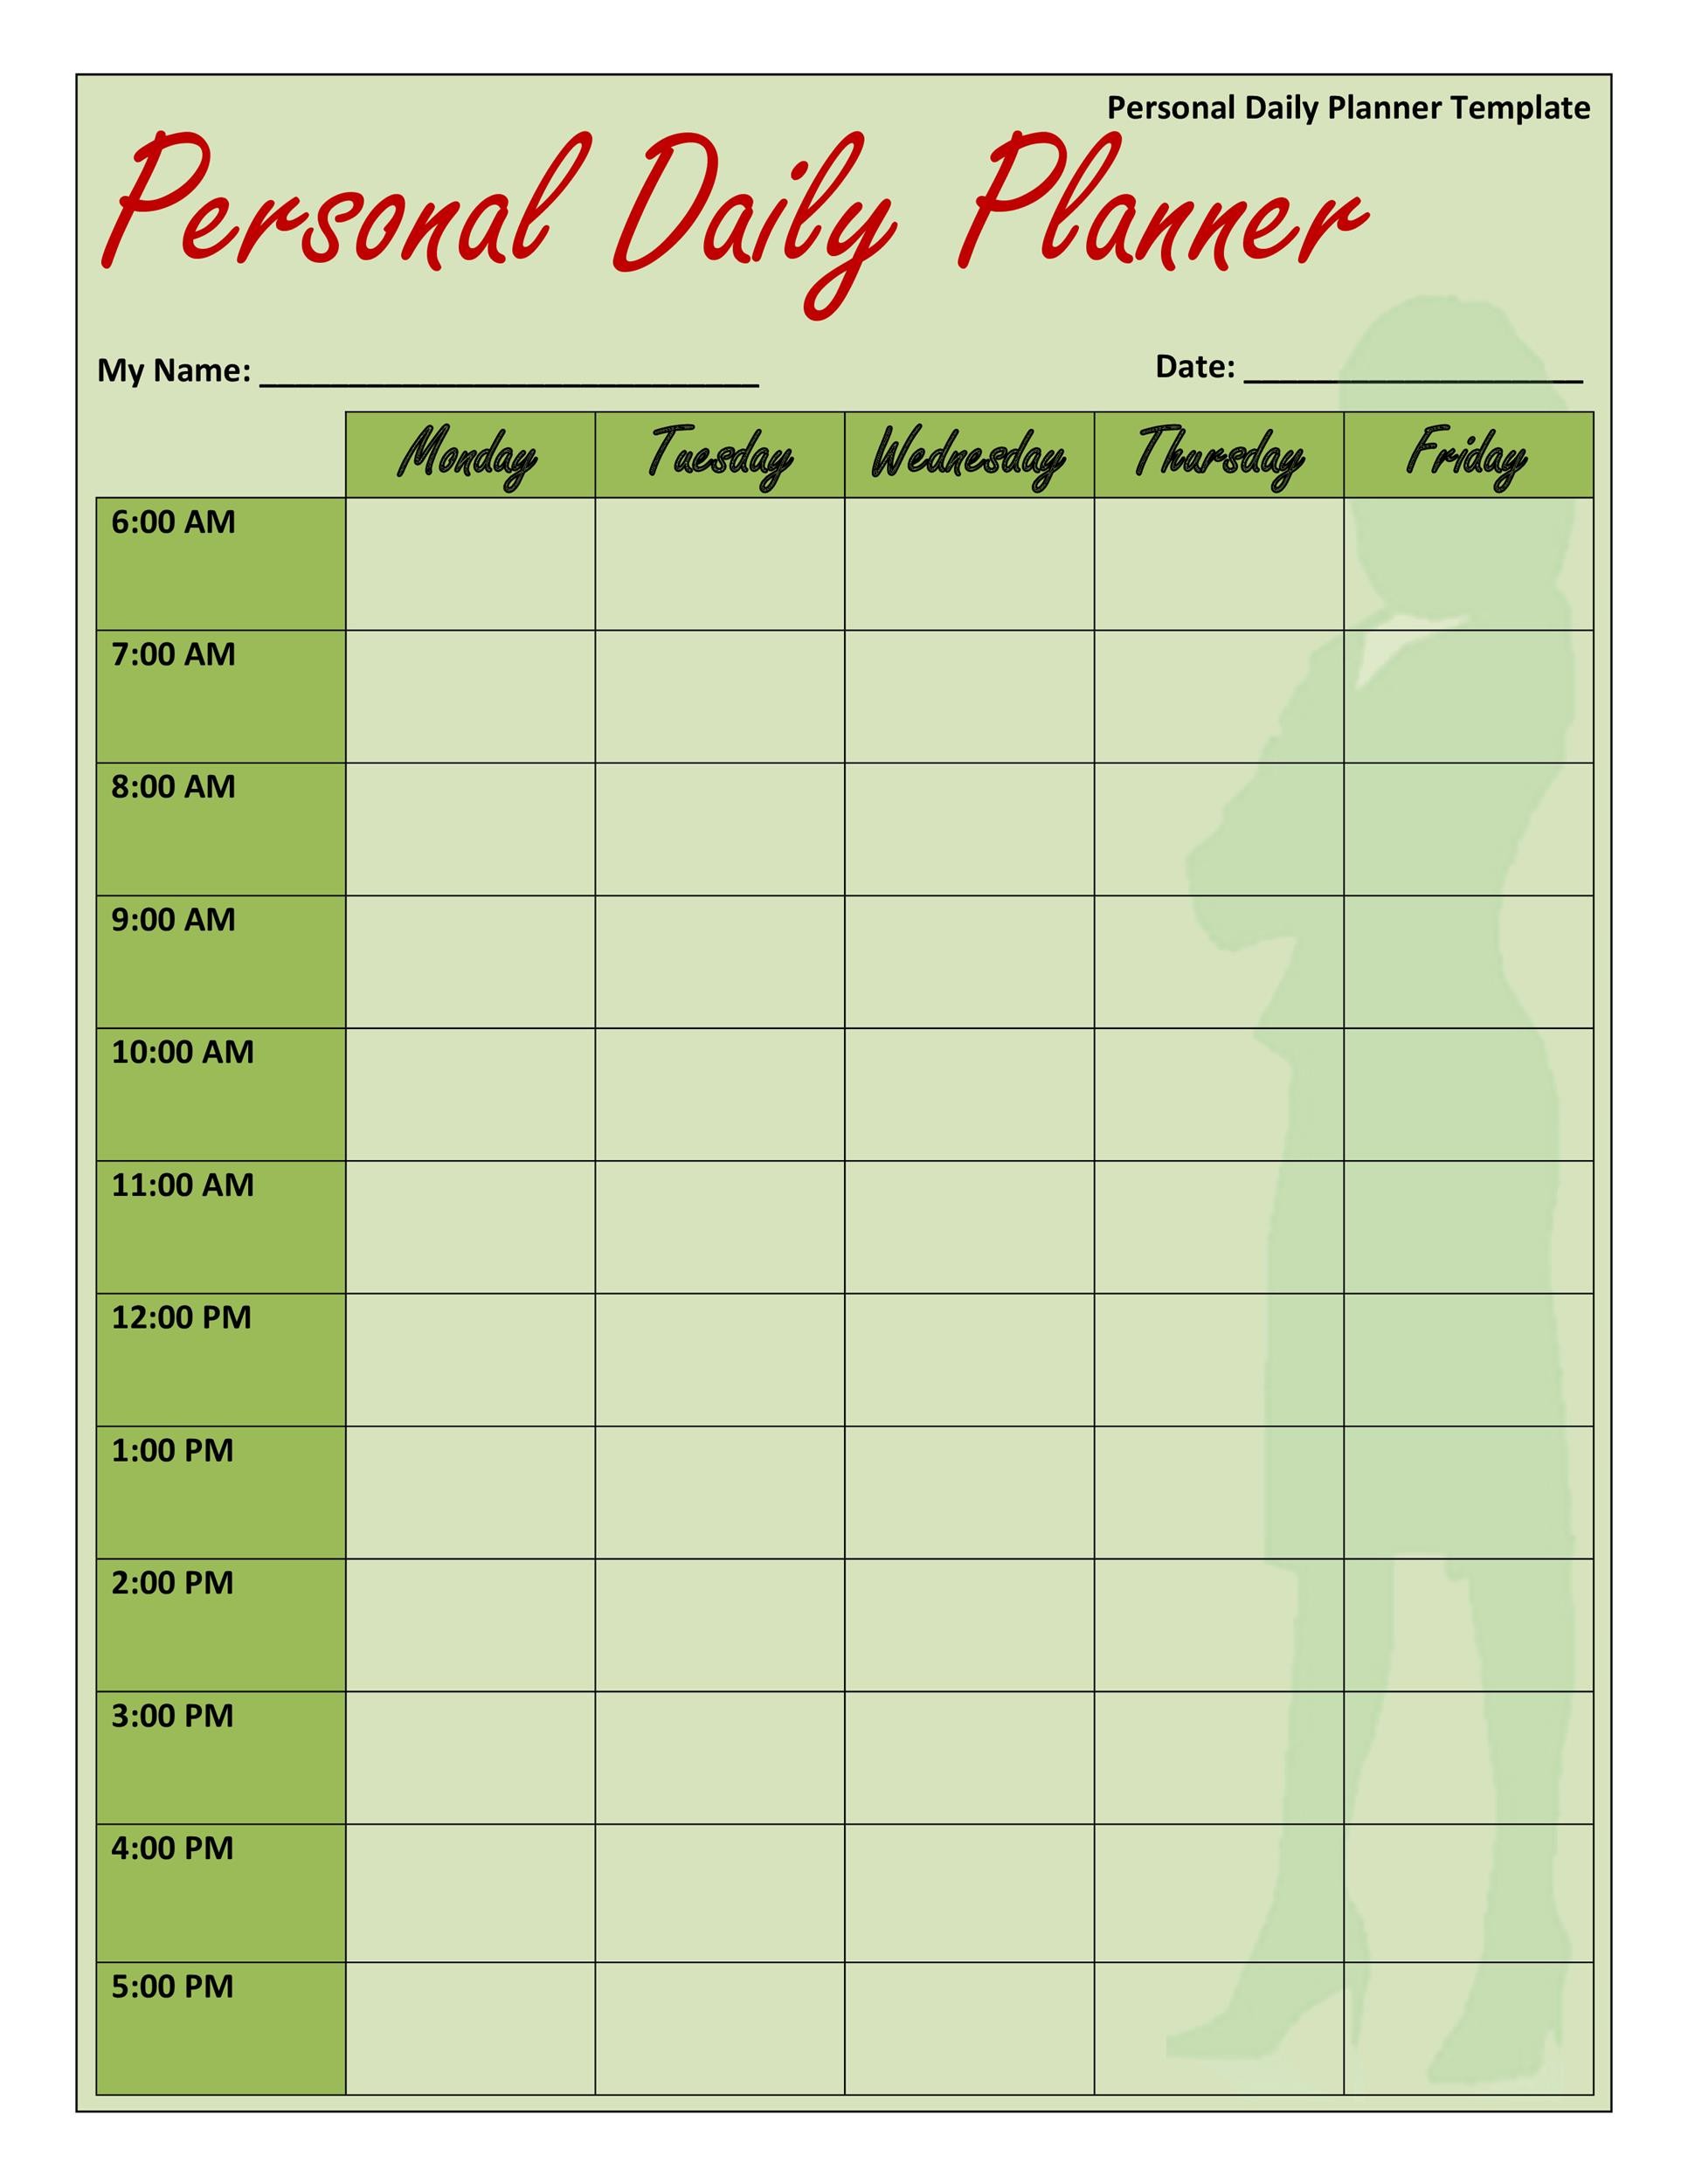 daily-planner-template-free-word-s-templates